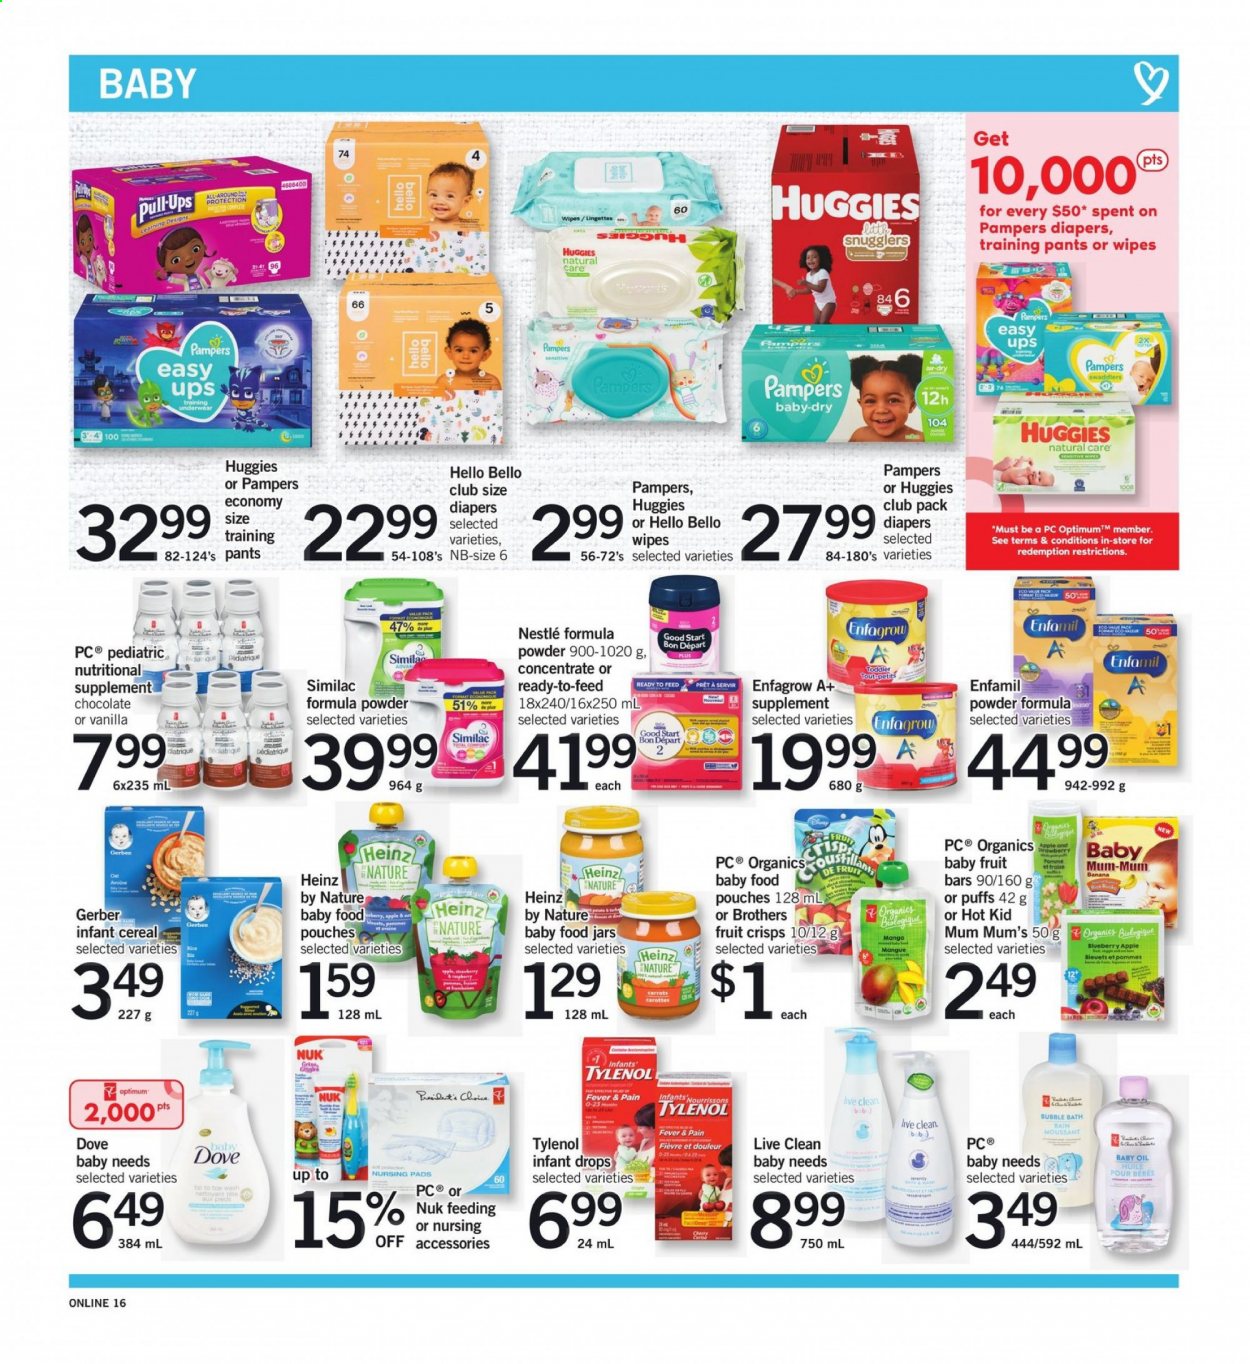 thumbnail - Fortinos Flyer - April 15, 2021 - April 21, 2021 - Sales products - puffs, rusks, chocolate, Gerber, oats, Heinz, cereals, oil, BROTHERS, Enfamil, Similac, wipes, pants, nappies, Nuk, baby pants, baby oil, bubble bath, Mum, jar, Optimum, underwear, Tylenol, nutritional supplement, Nestlé, Huggies, Pampers. Page 16.